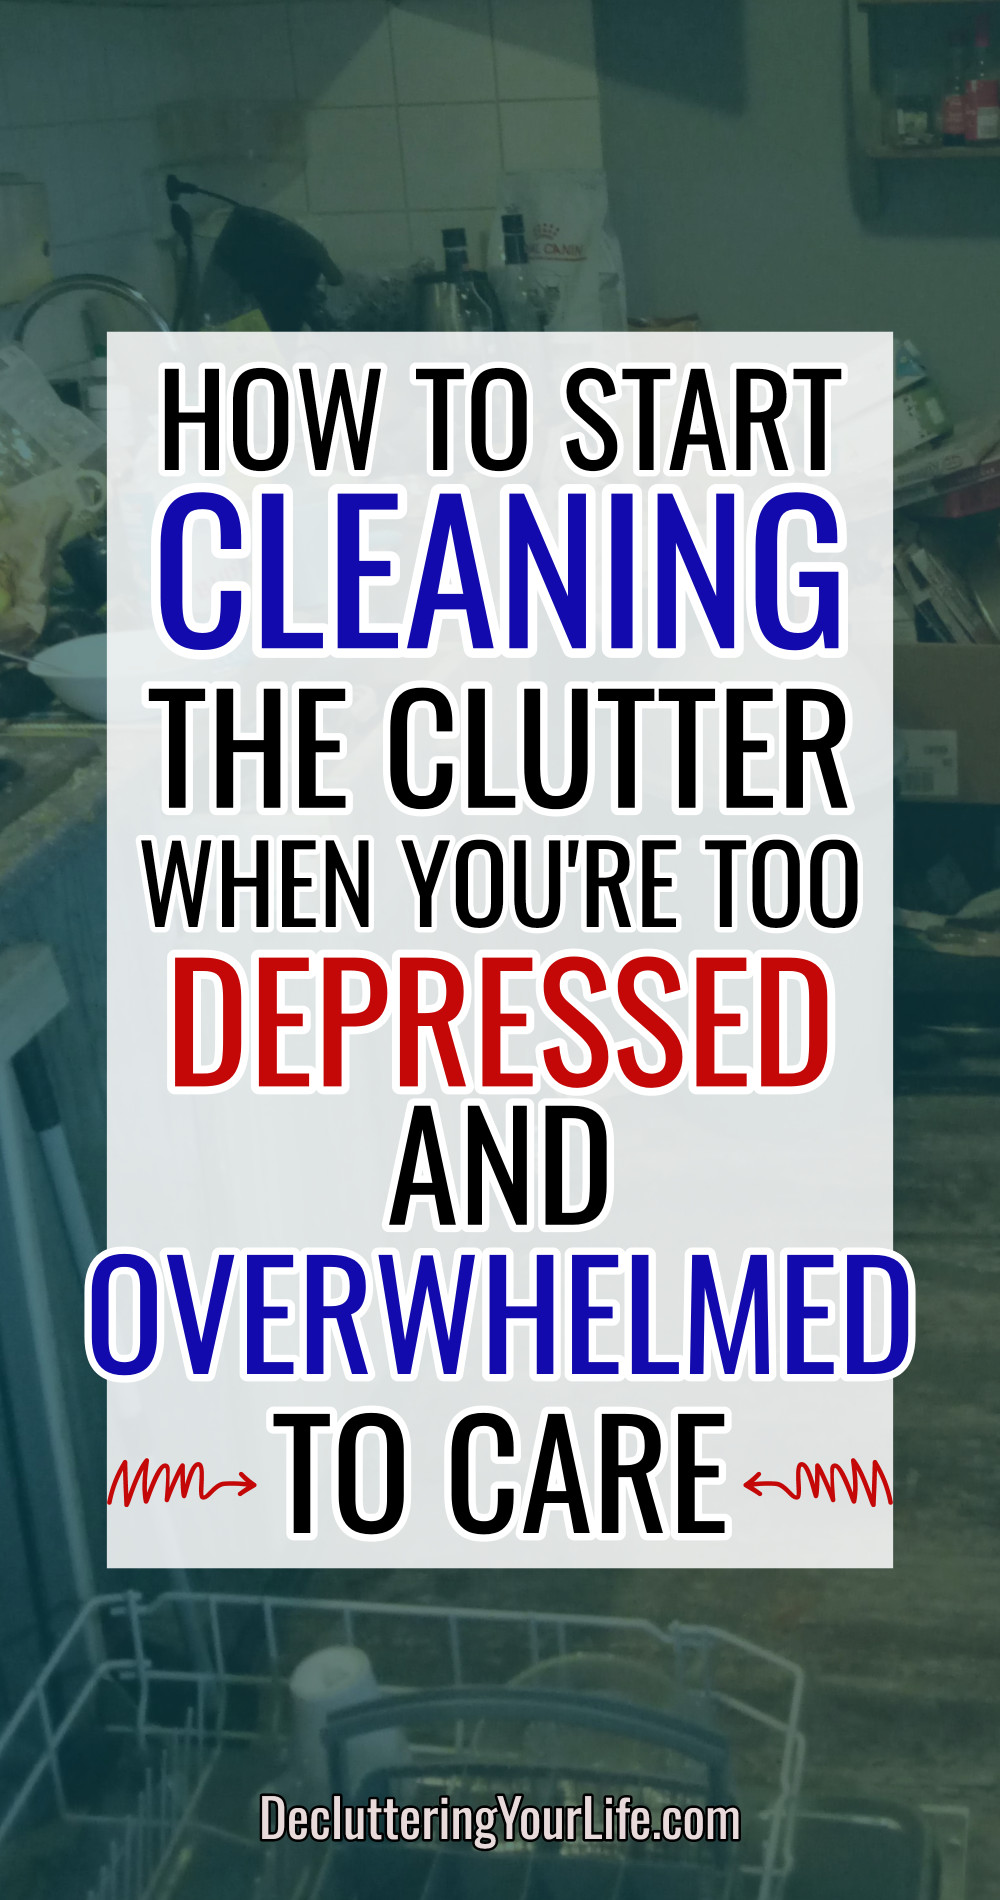 How To Start Cleaning The Clutter When You're Too Depressed and Overwhelmed To Care